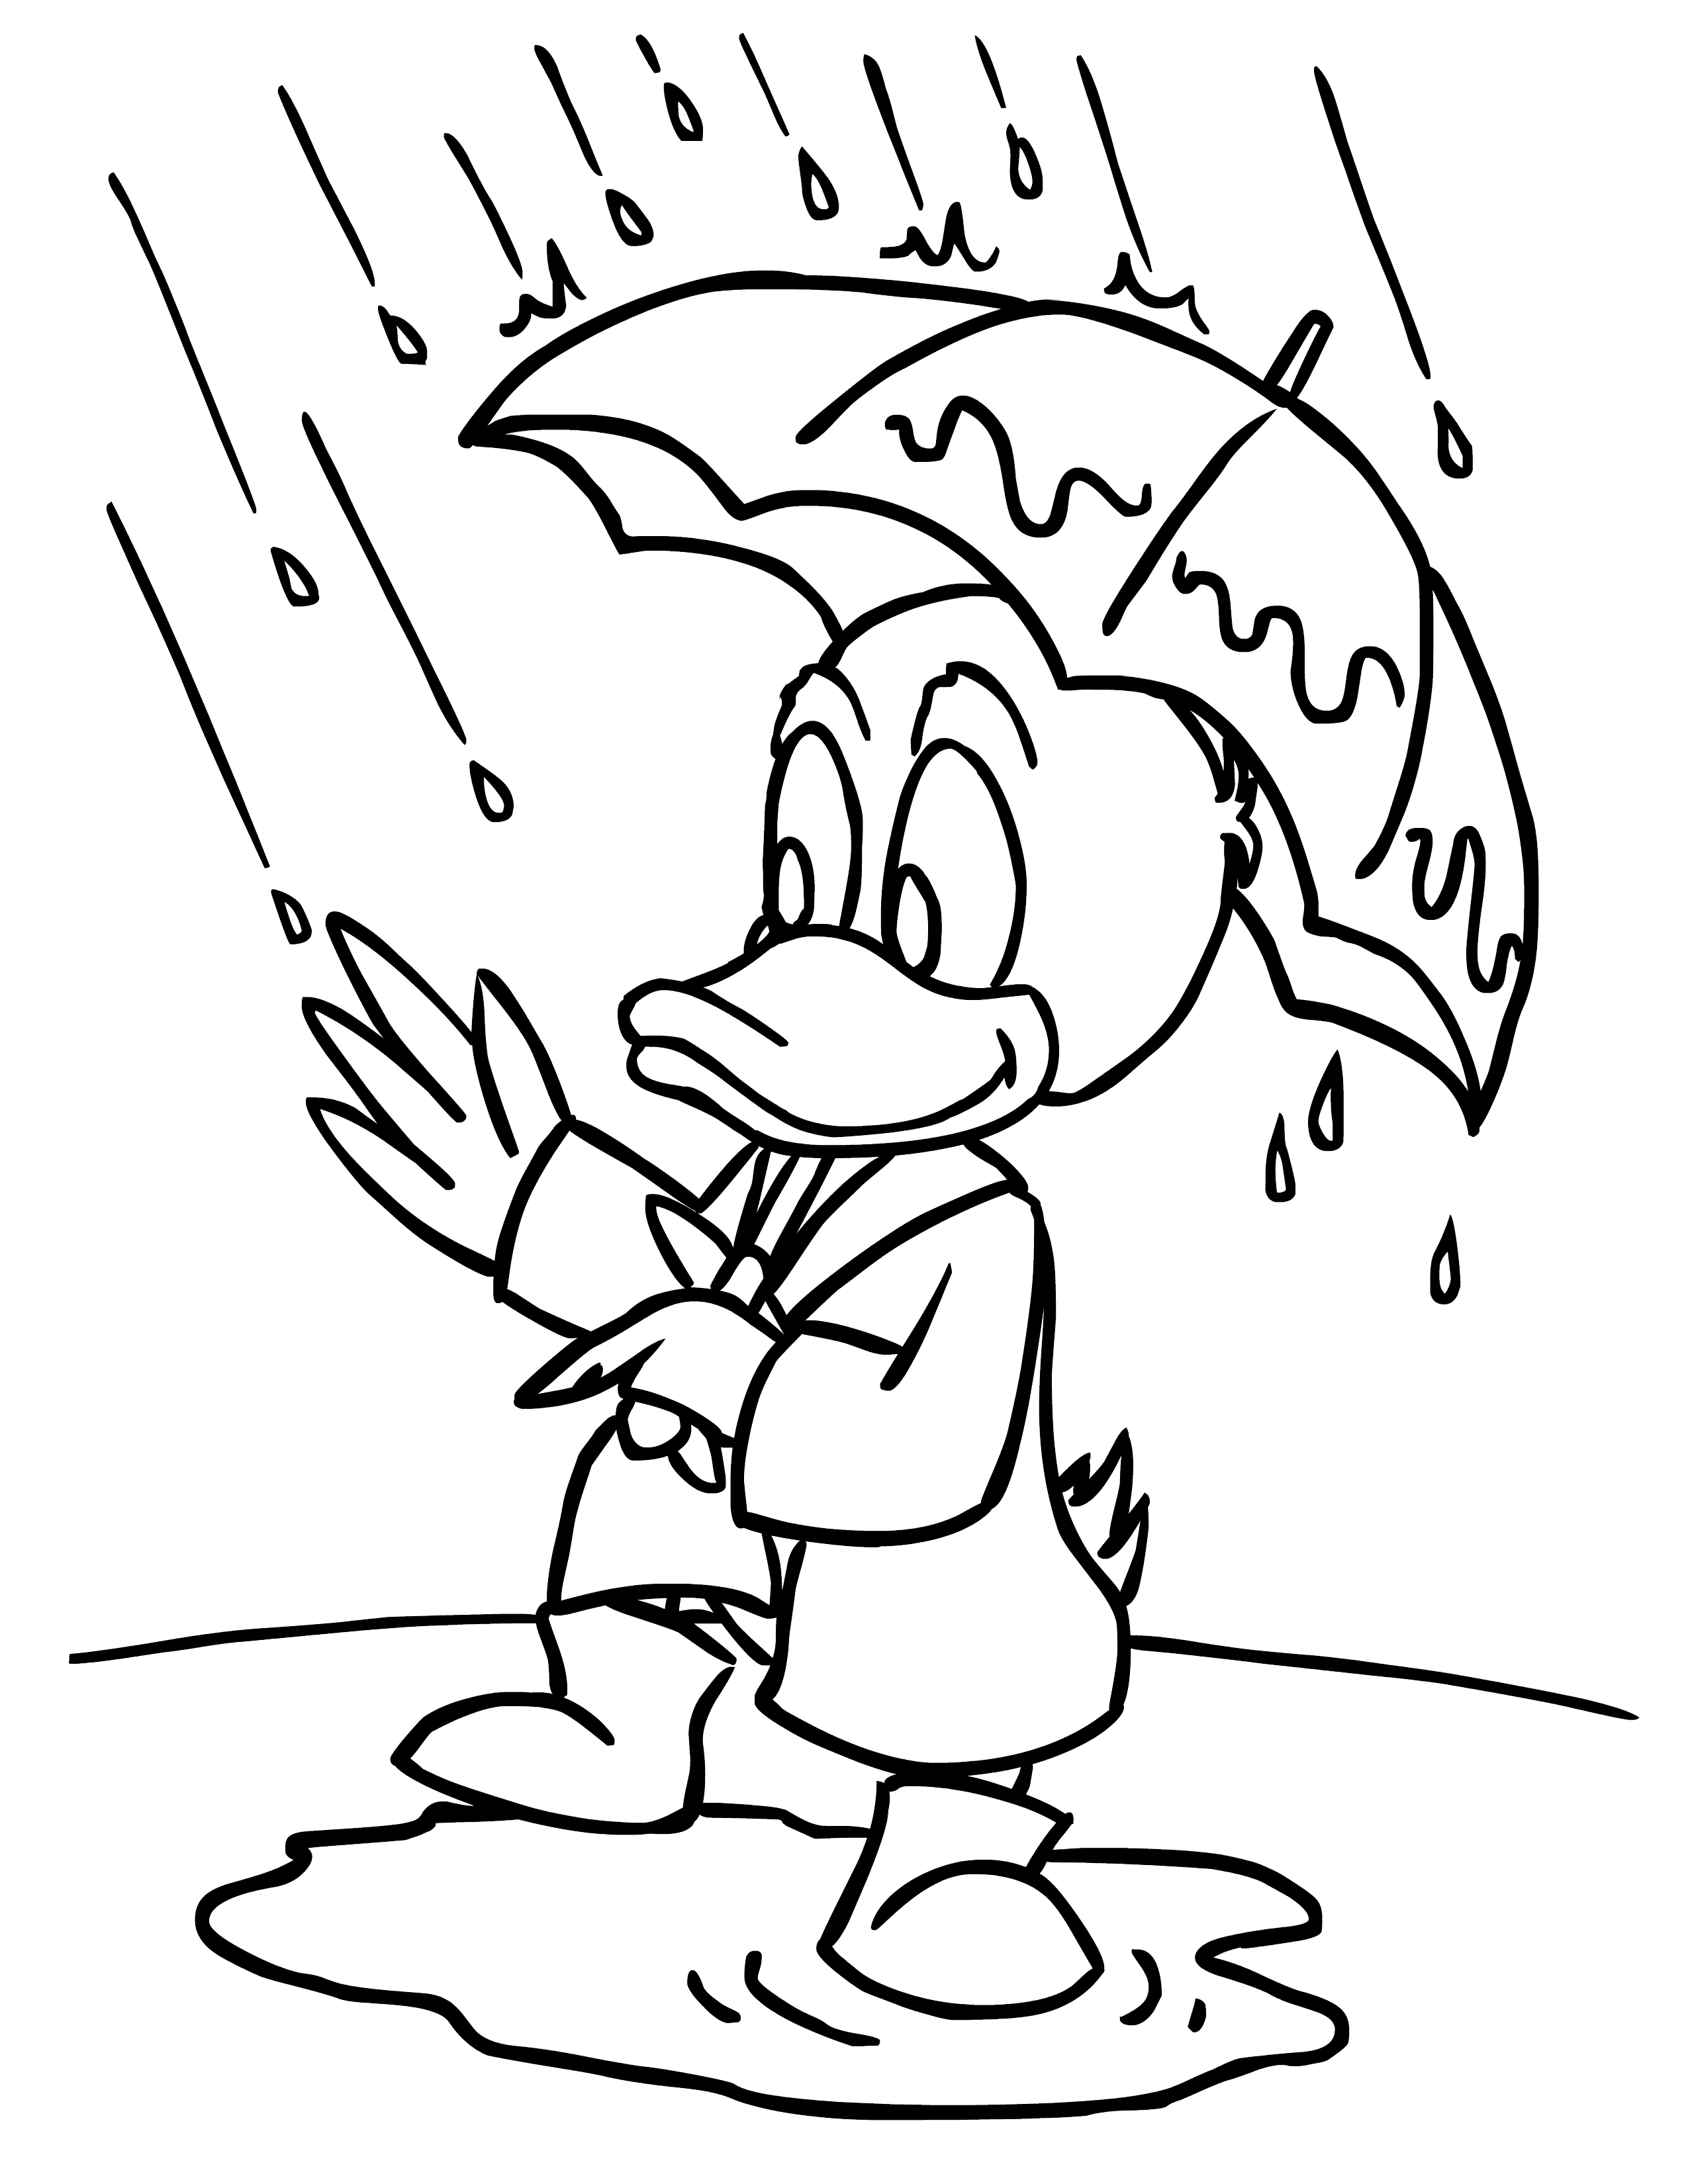 Rainy Day Coloring Pages for Class | Educative Printable